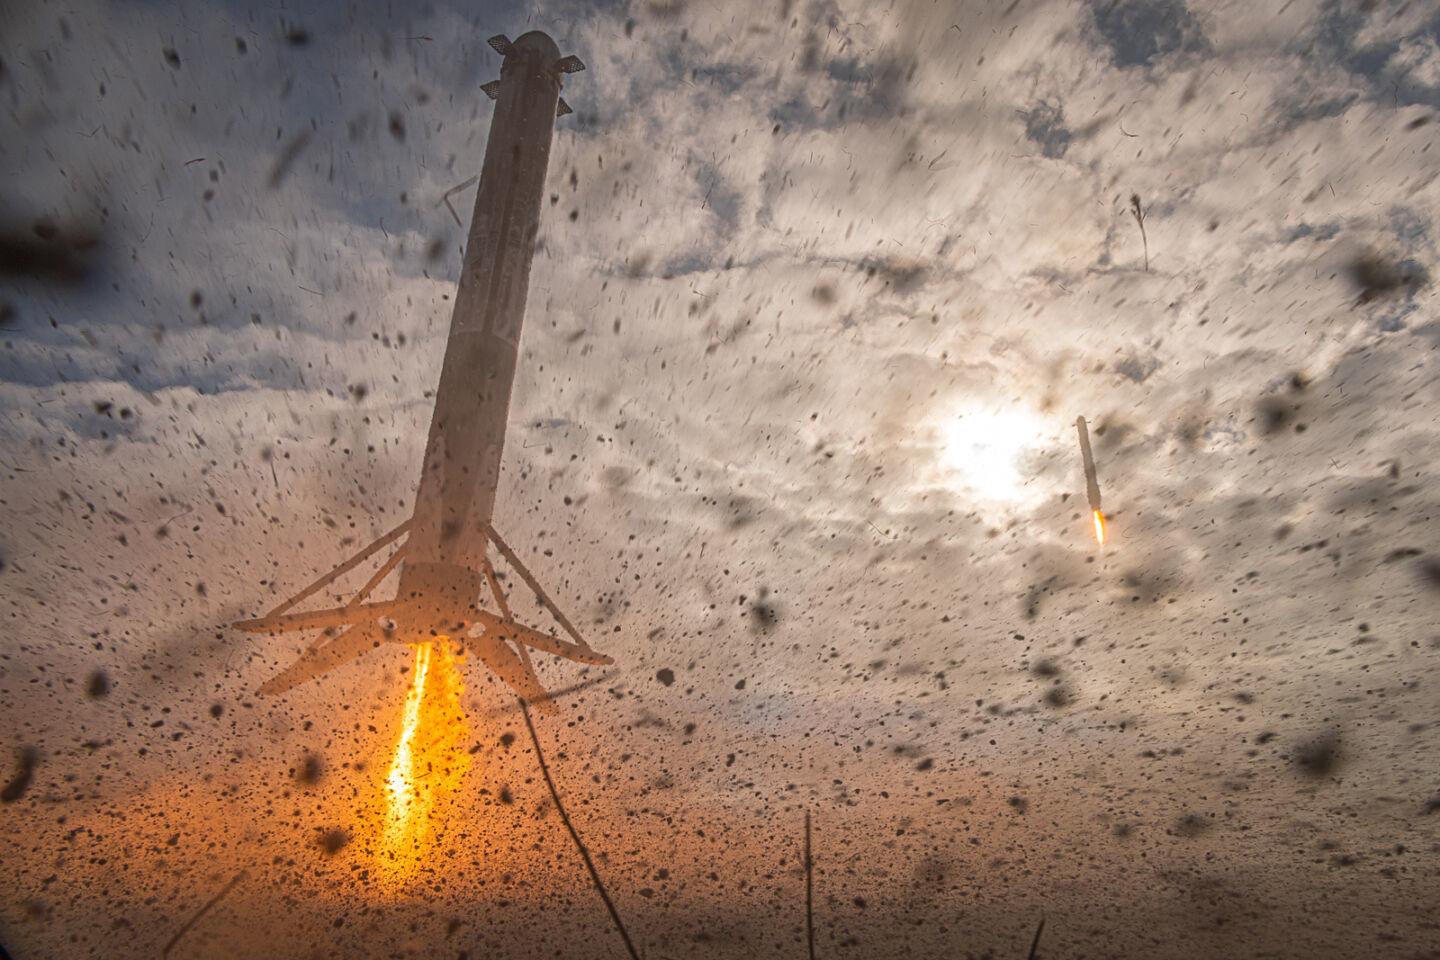 Two Falcon rockets landing close-up is amazing